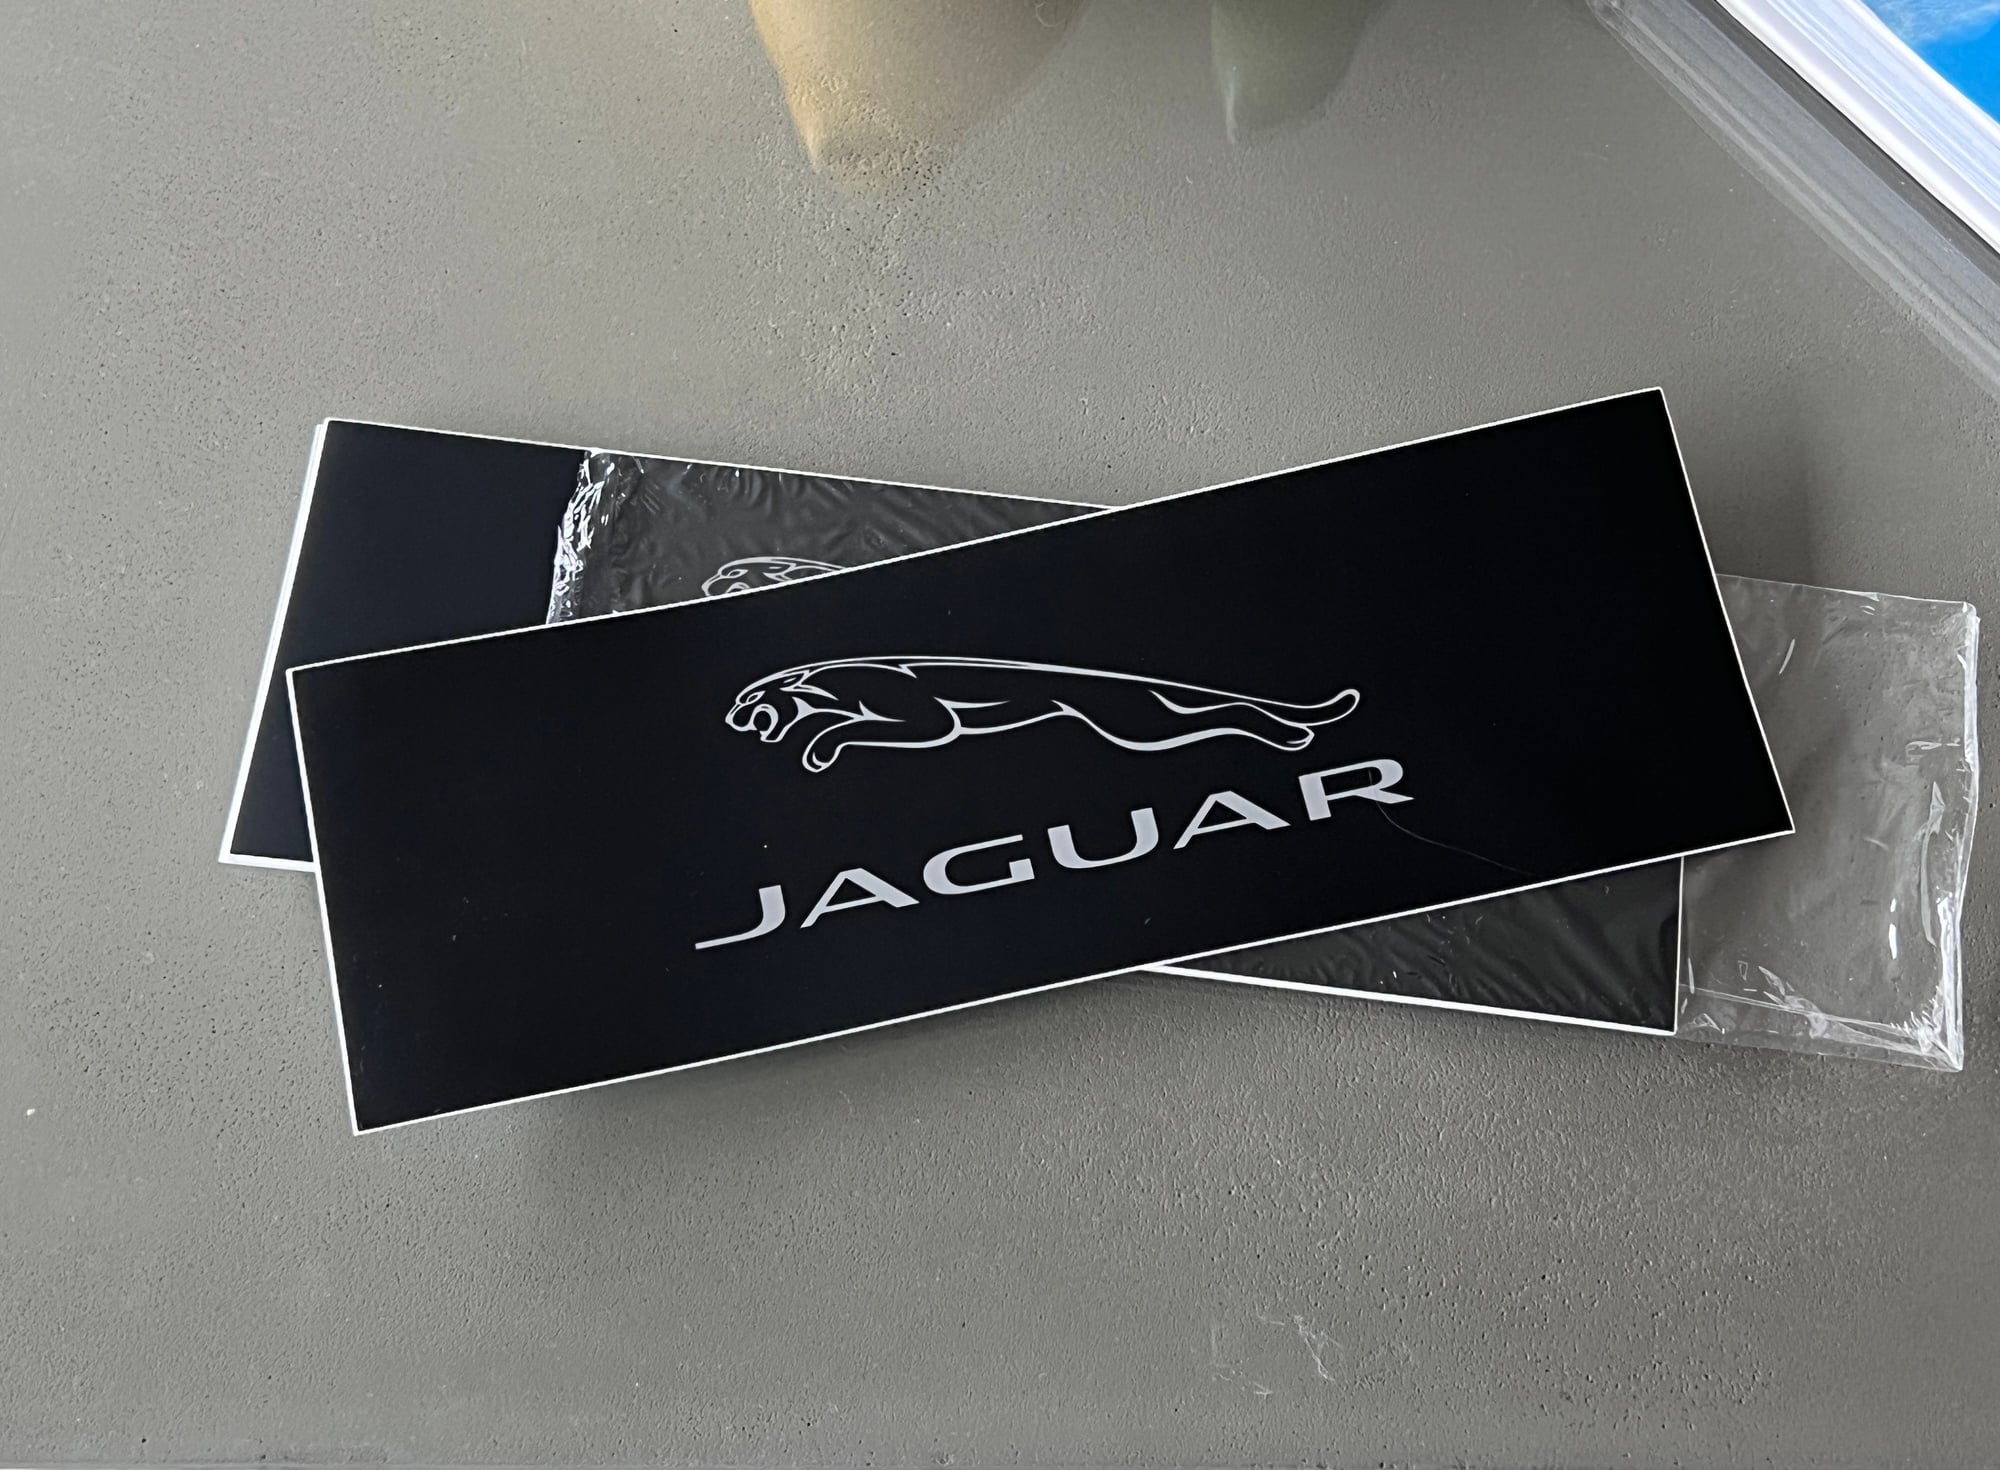 Interior/Upholstery - Jaguar Visor Stickers (covers ugly air bag warnings) - New - 0  All Models - Seattle, WA 98116, United States